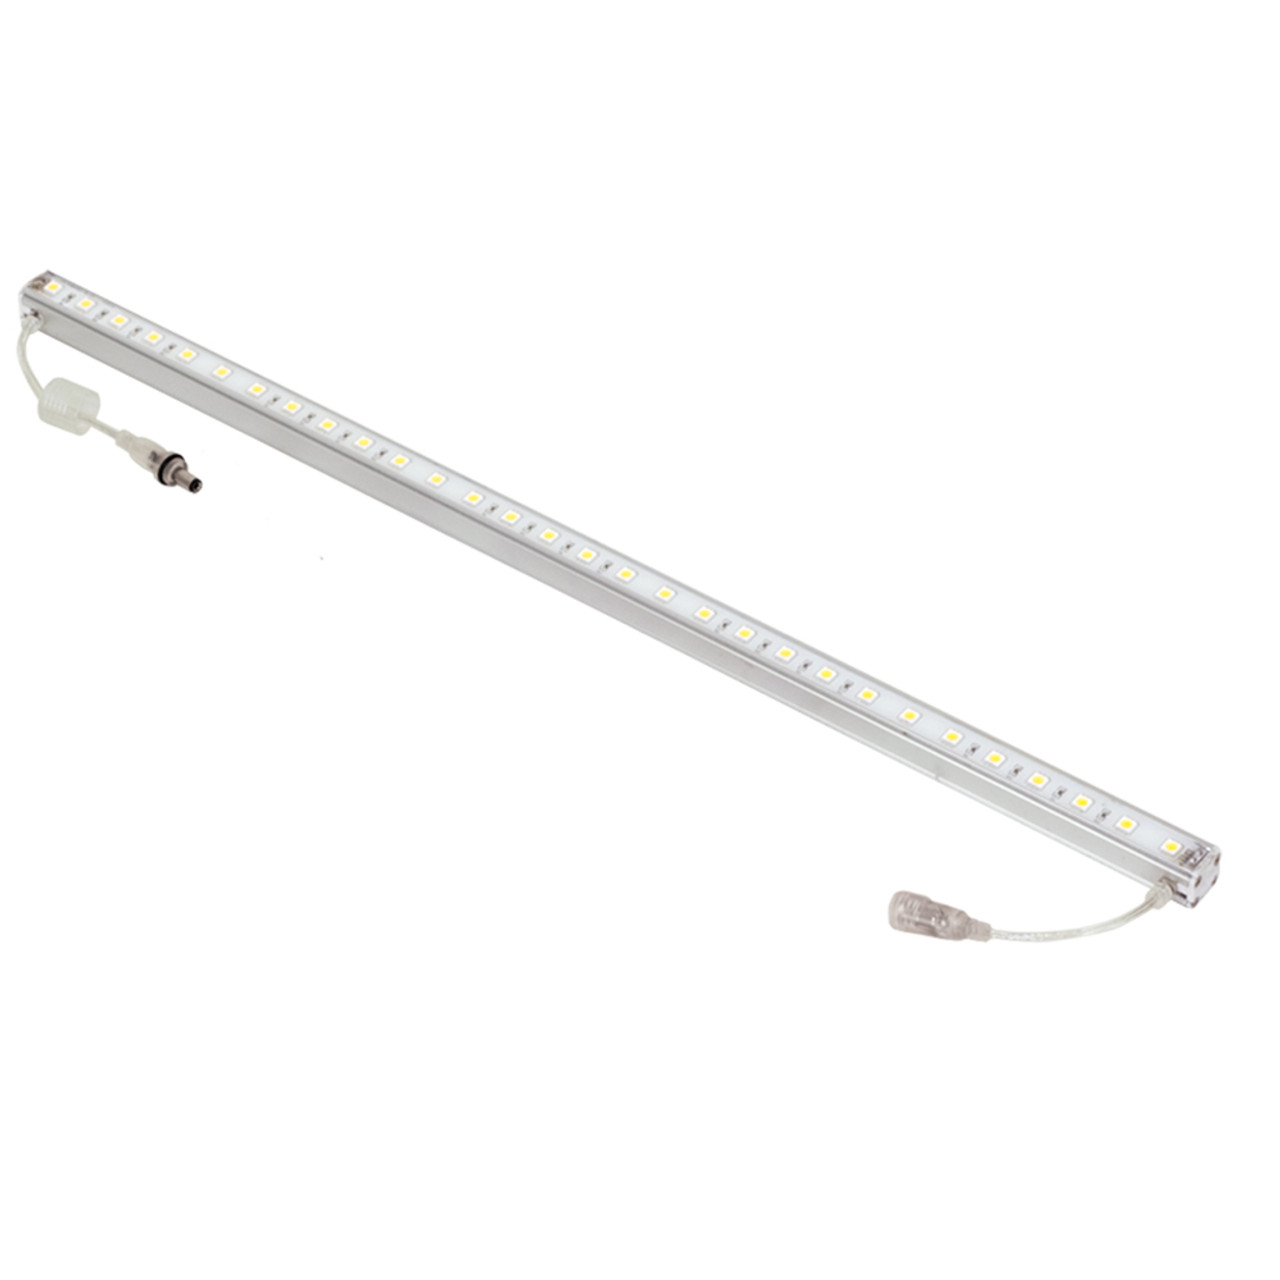 JESCO Lighting DL-RS-48-R 15.2W Dimmable linear LED fixture for wet,damp and dry locations. Aluminium extruded housing. , Red